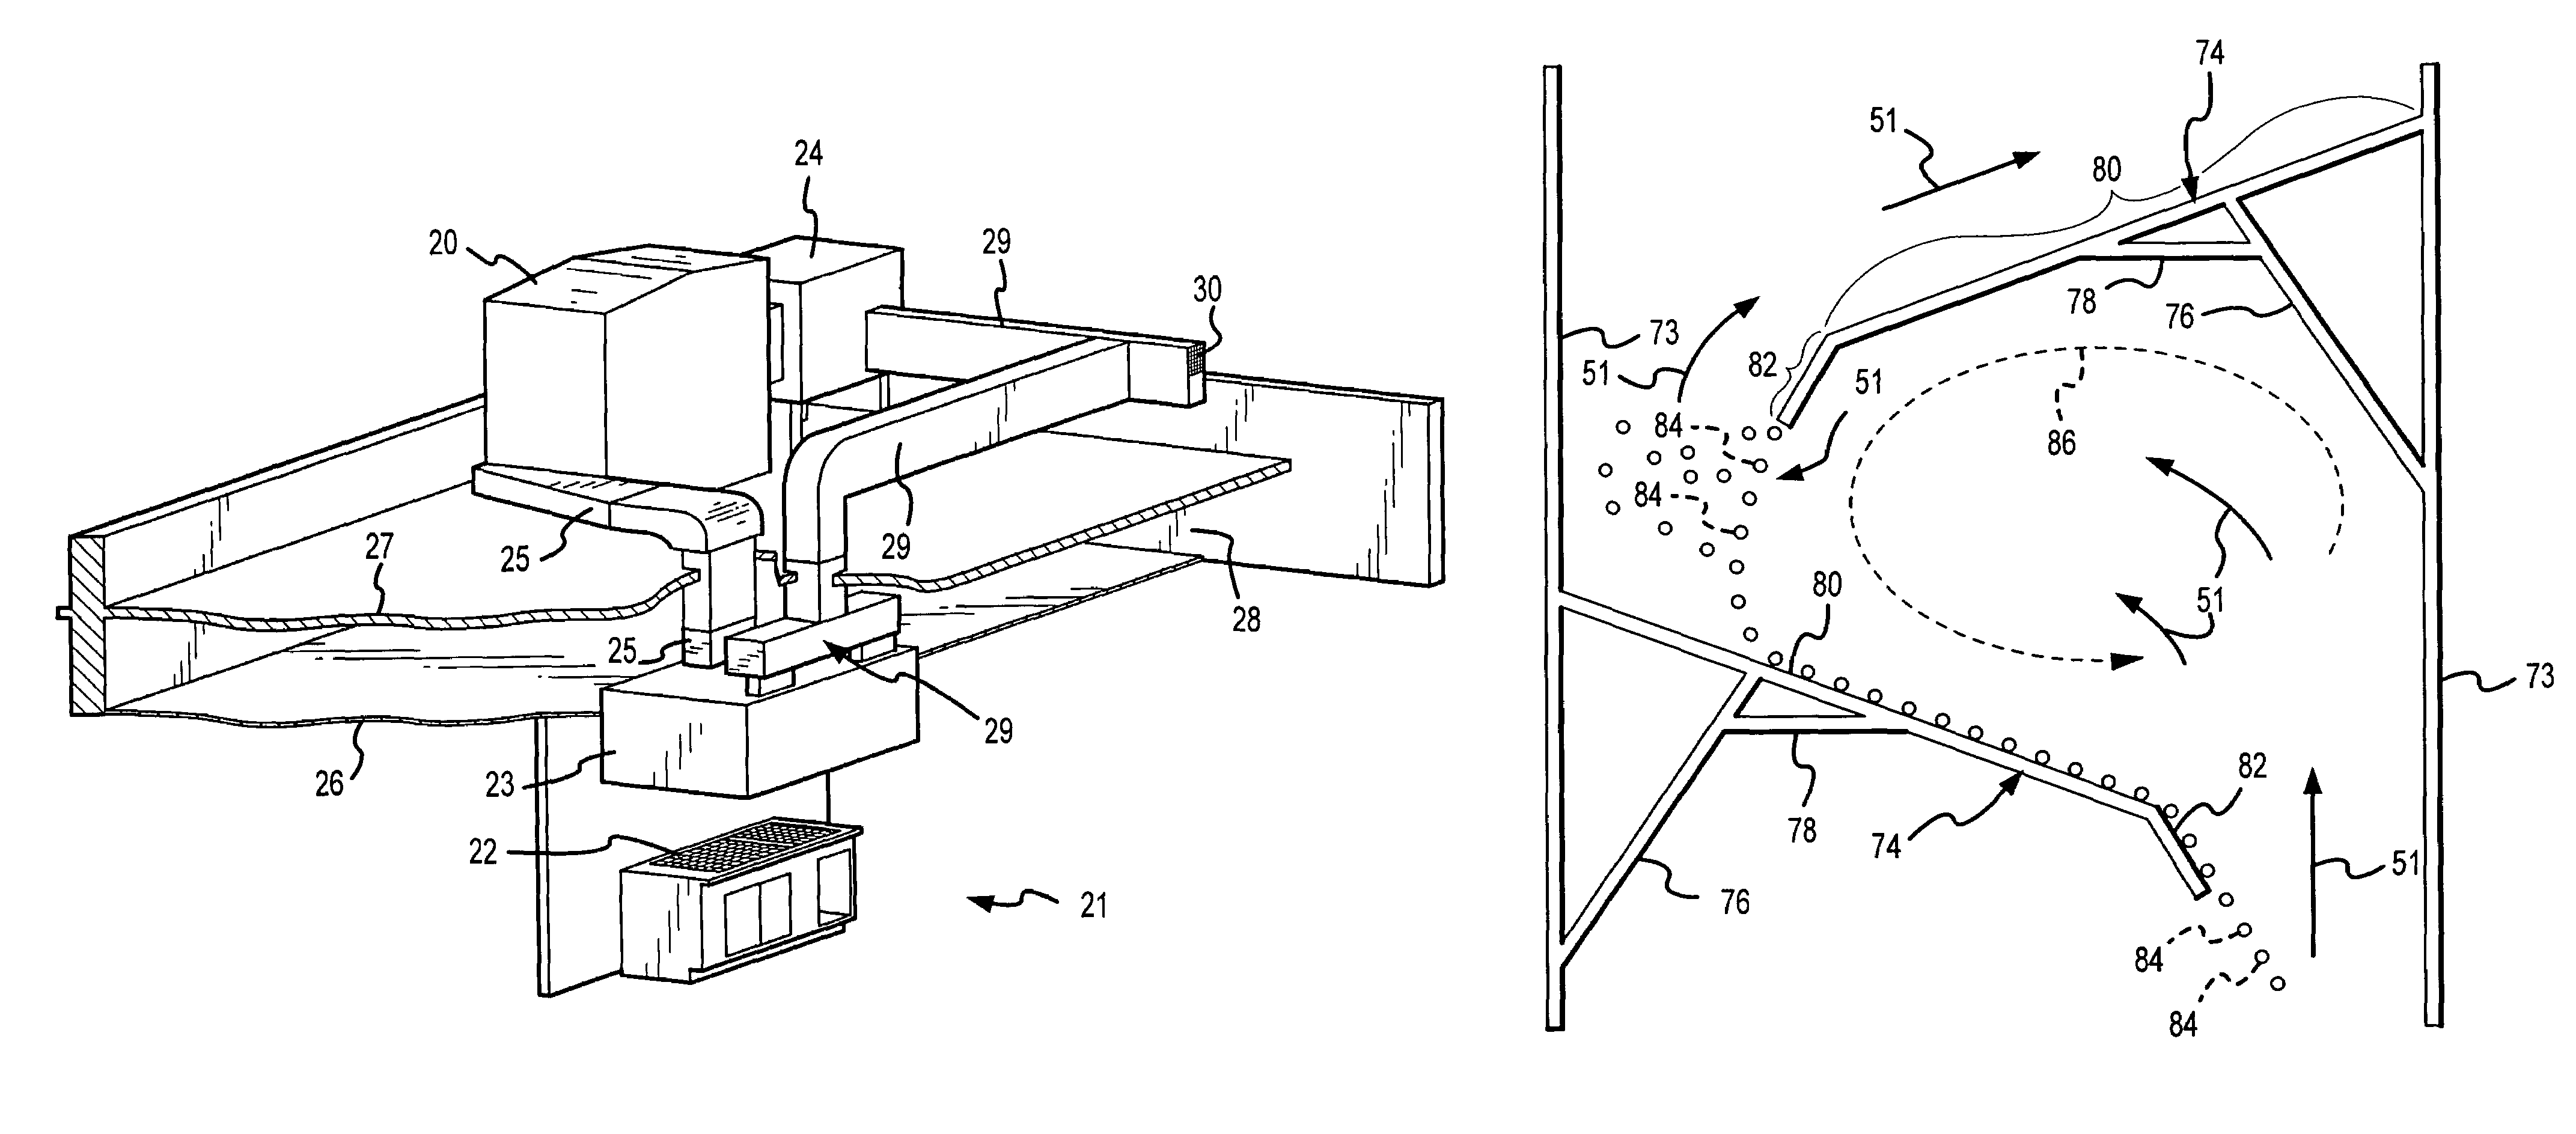 Apparatus and method for cleaning, neutralizing and recirculating exhaust air in a confined environment